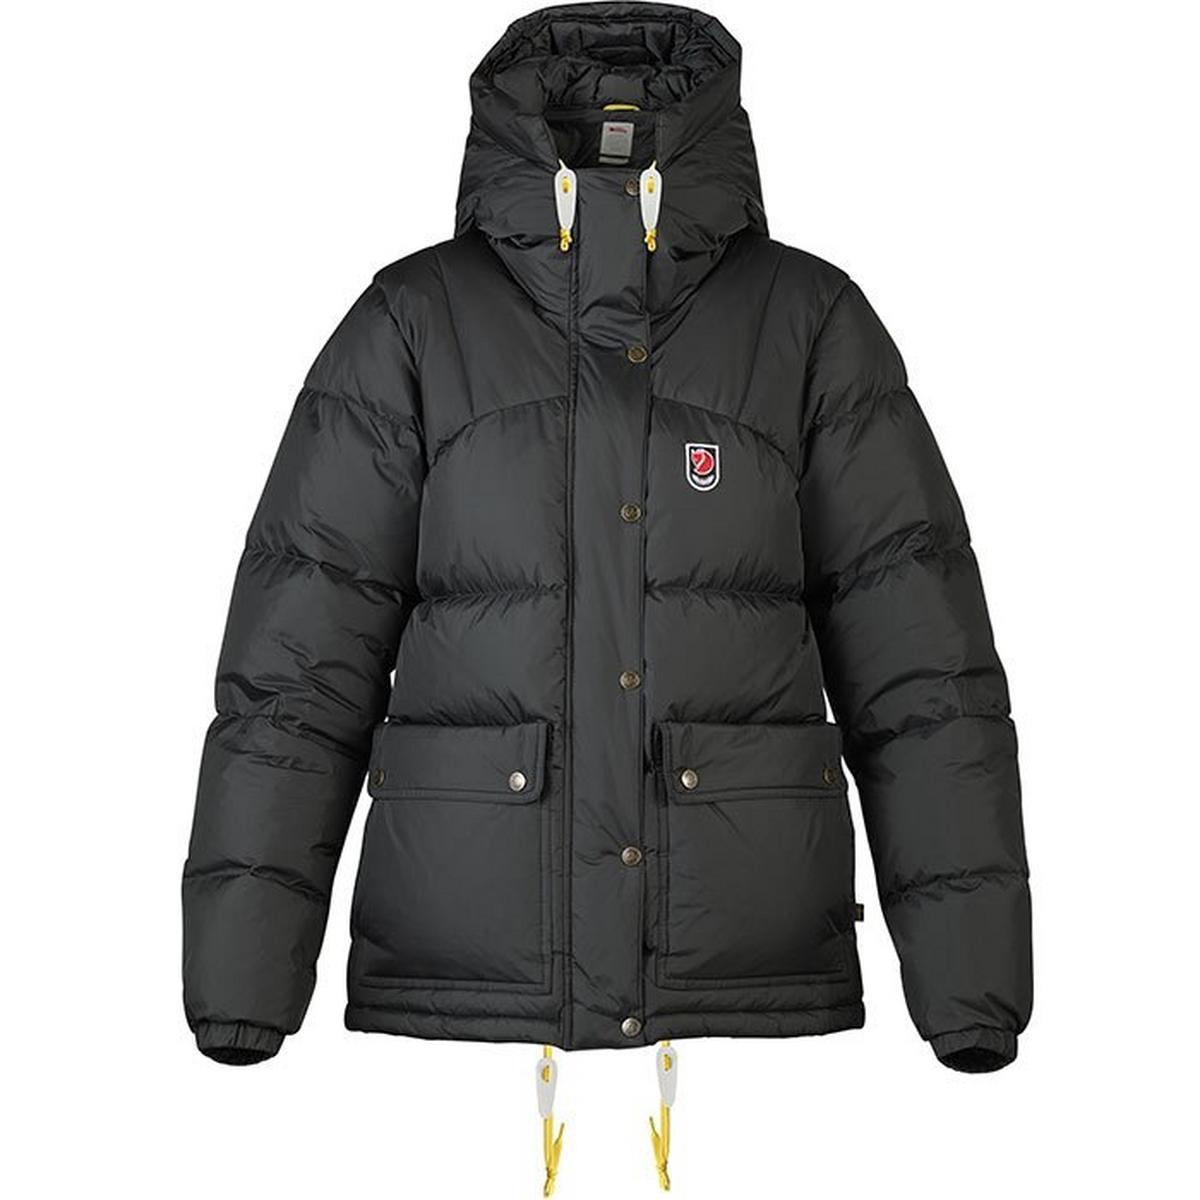 Women's Expedition Down Lite Jacket